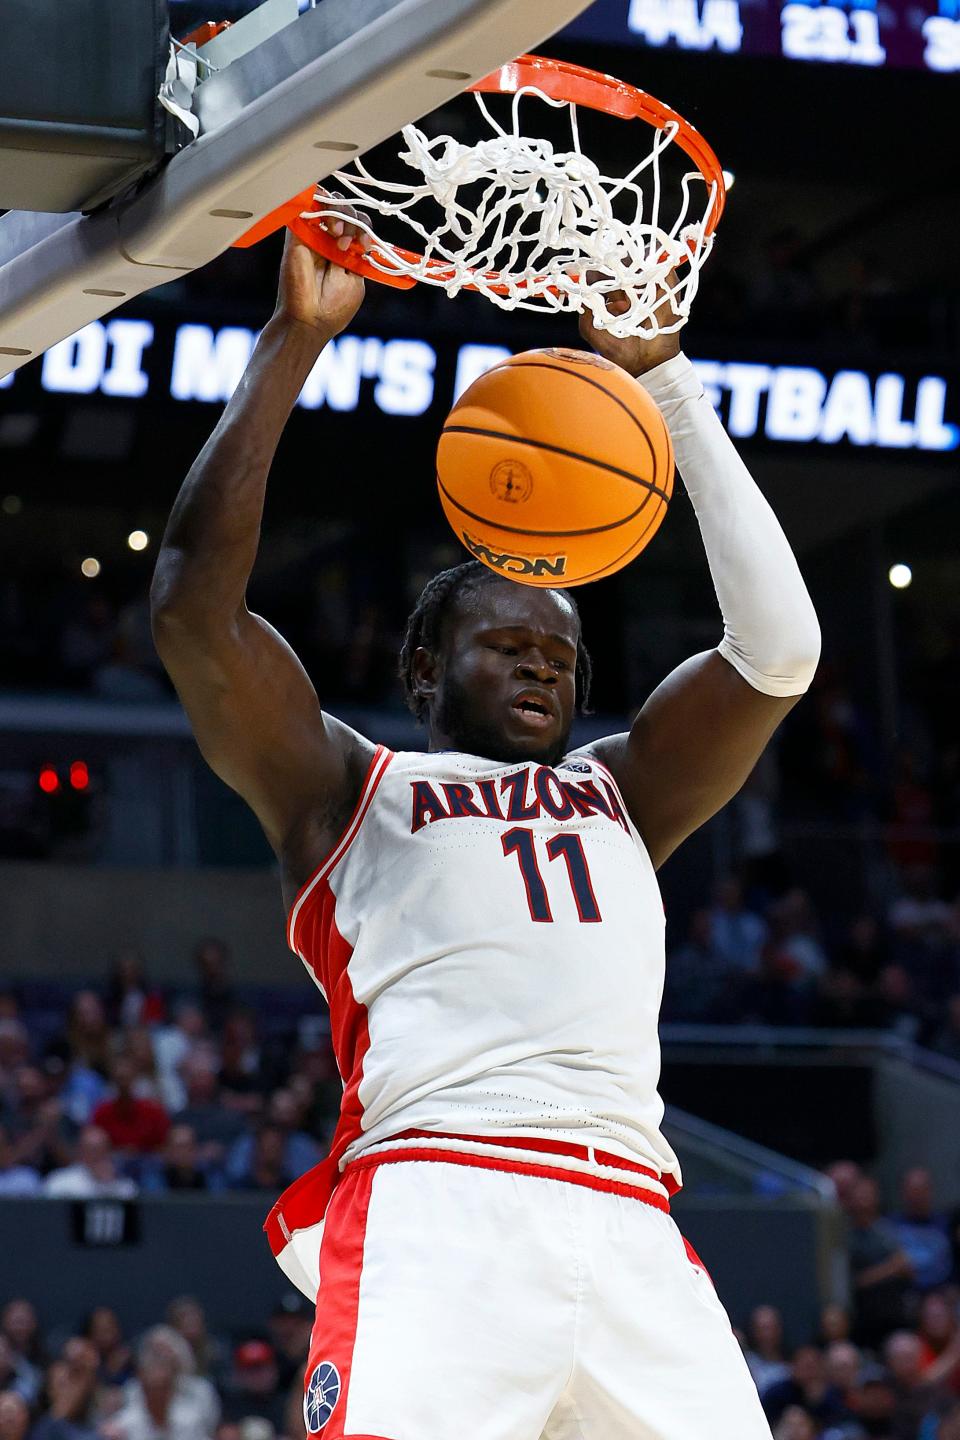 Oumar Ballo #11 of the Arizona Wildcats dunks against the Clemson Tigers during the second half in the Sweet 16 round of the NCAA Men's Basketball Tournament at Crypto.com Arena on March 28, 2024 in Los Angeles.